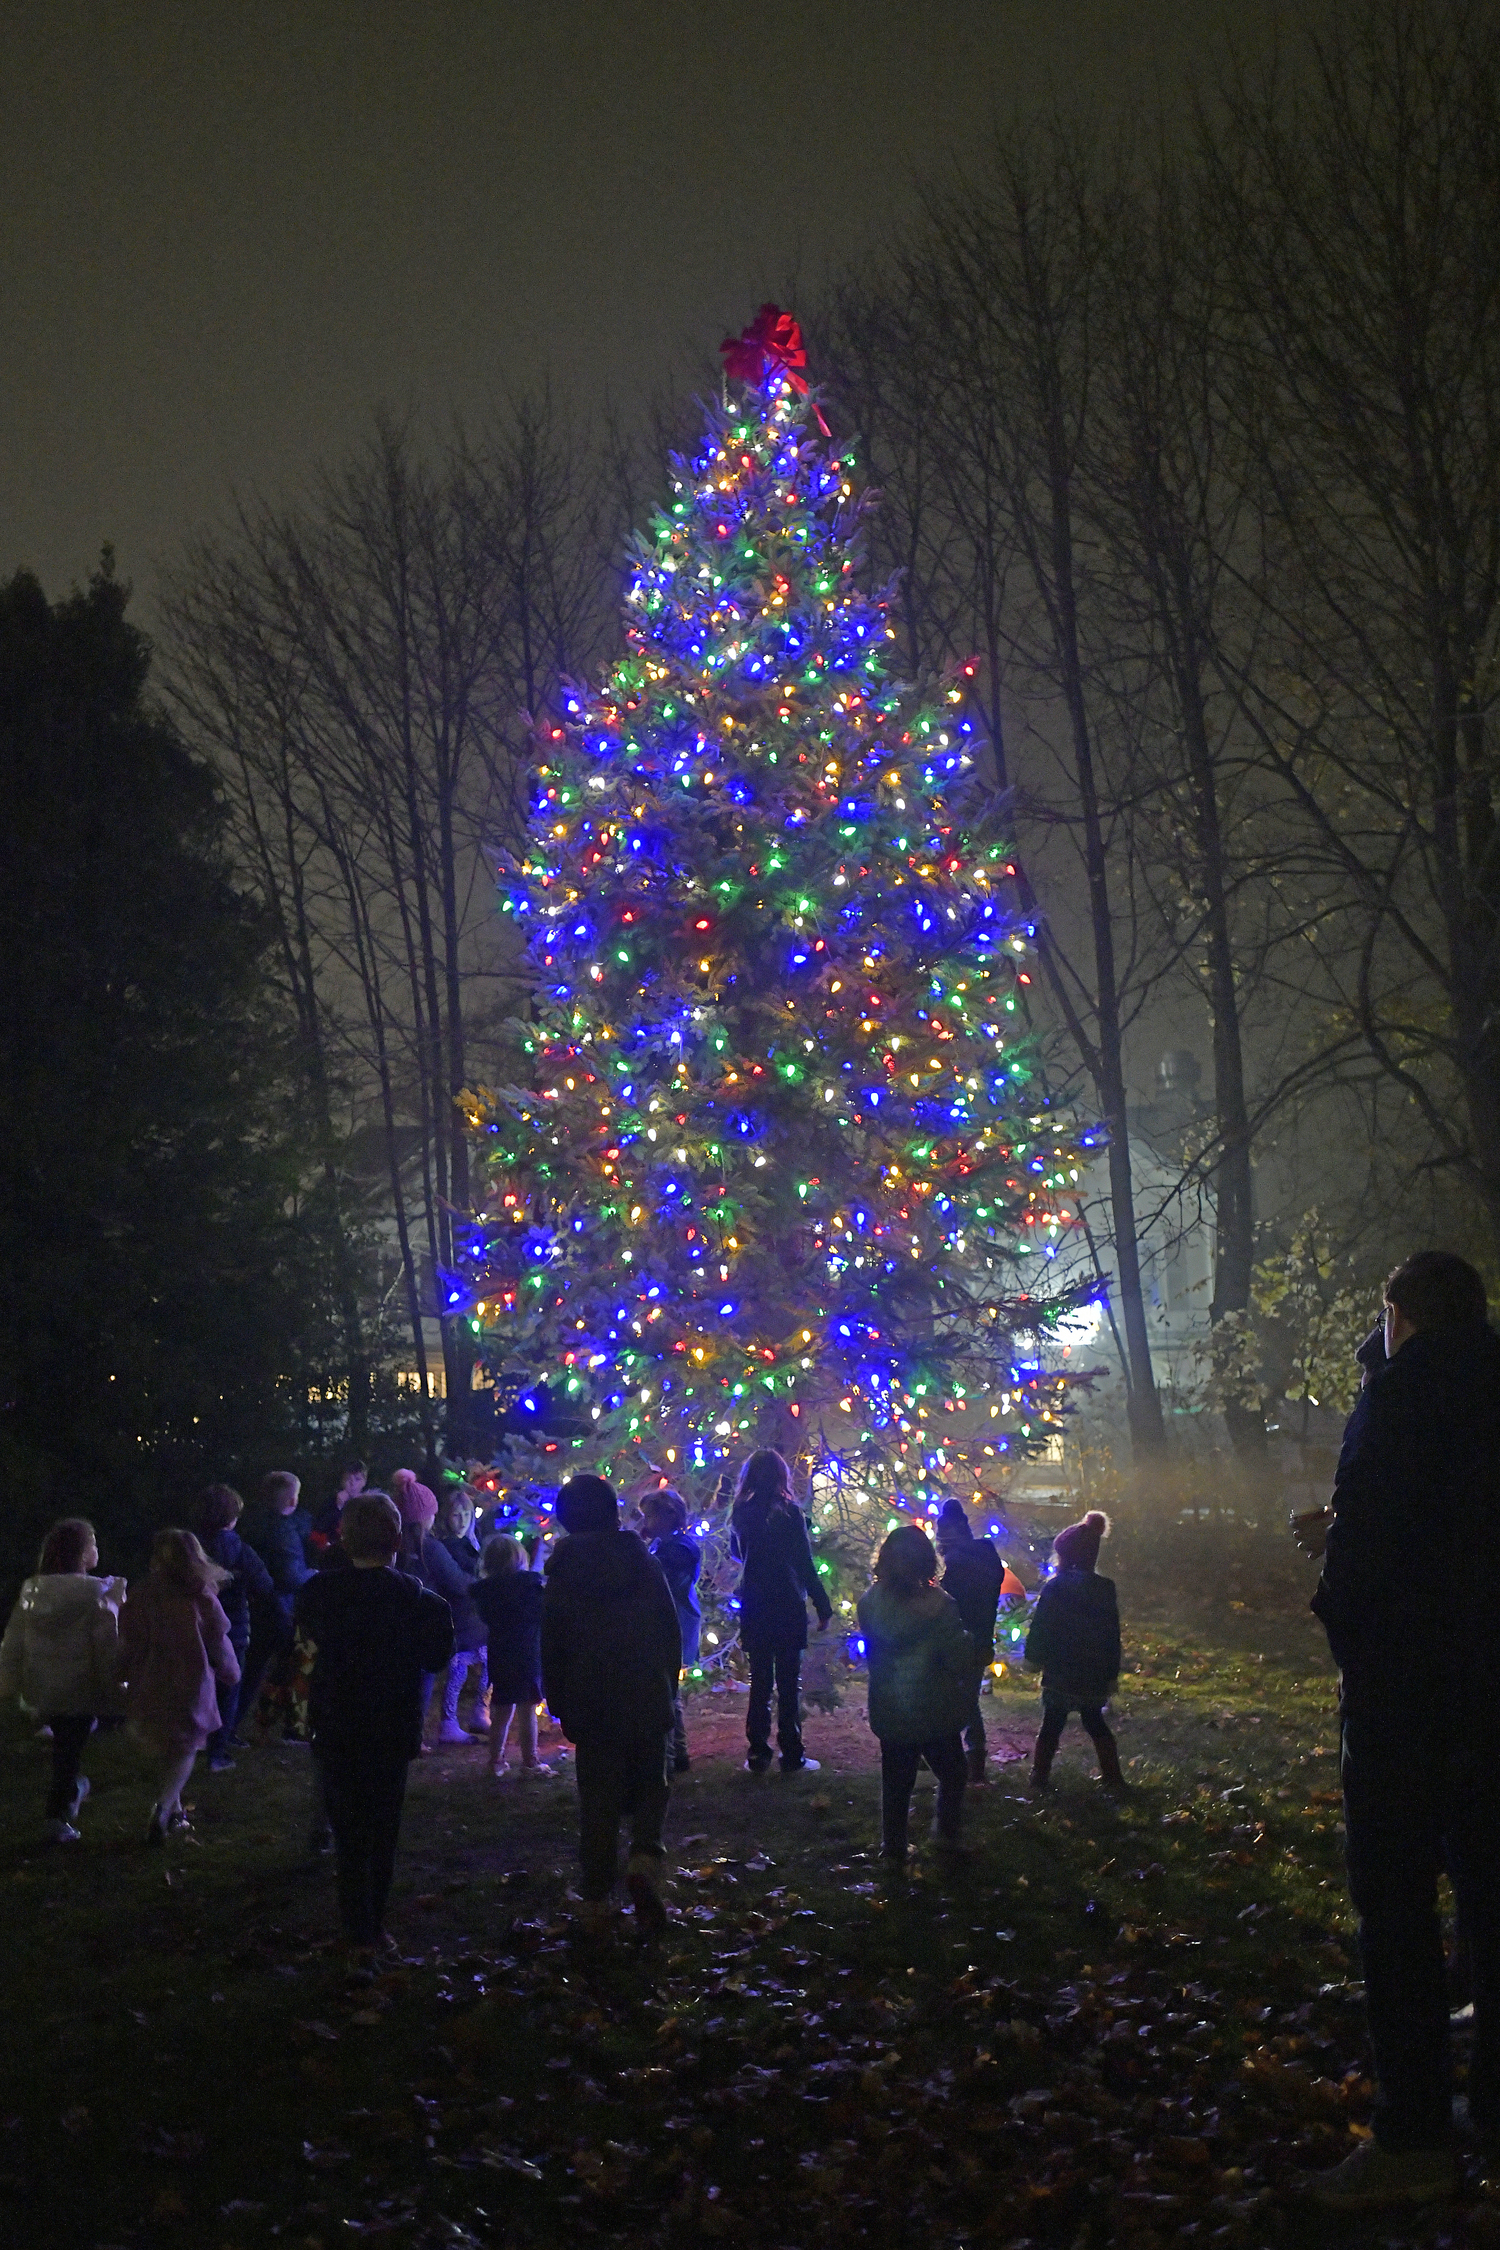 The tree is lighted on the village green in Westhampton Beach on Saturday evening.